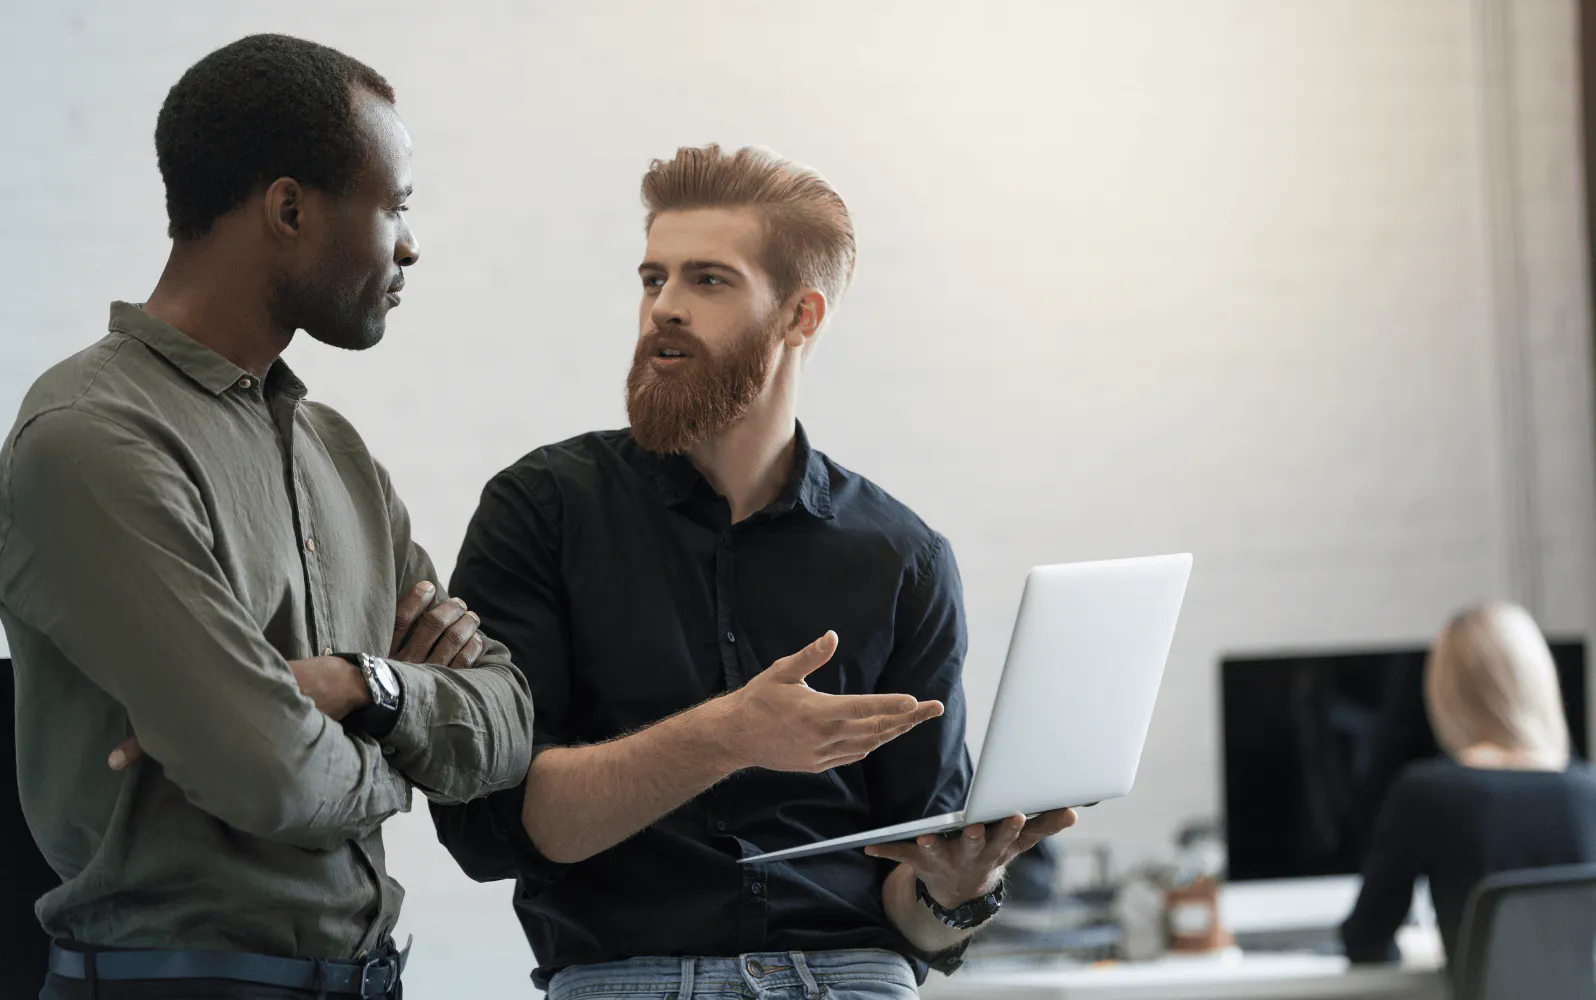 Two people standing next to each other having a discussion in an office